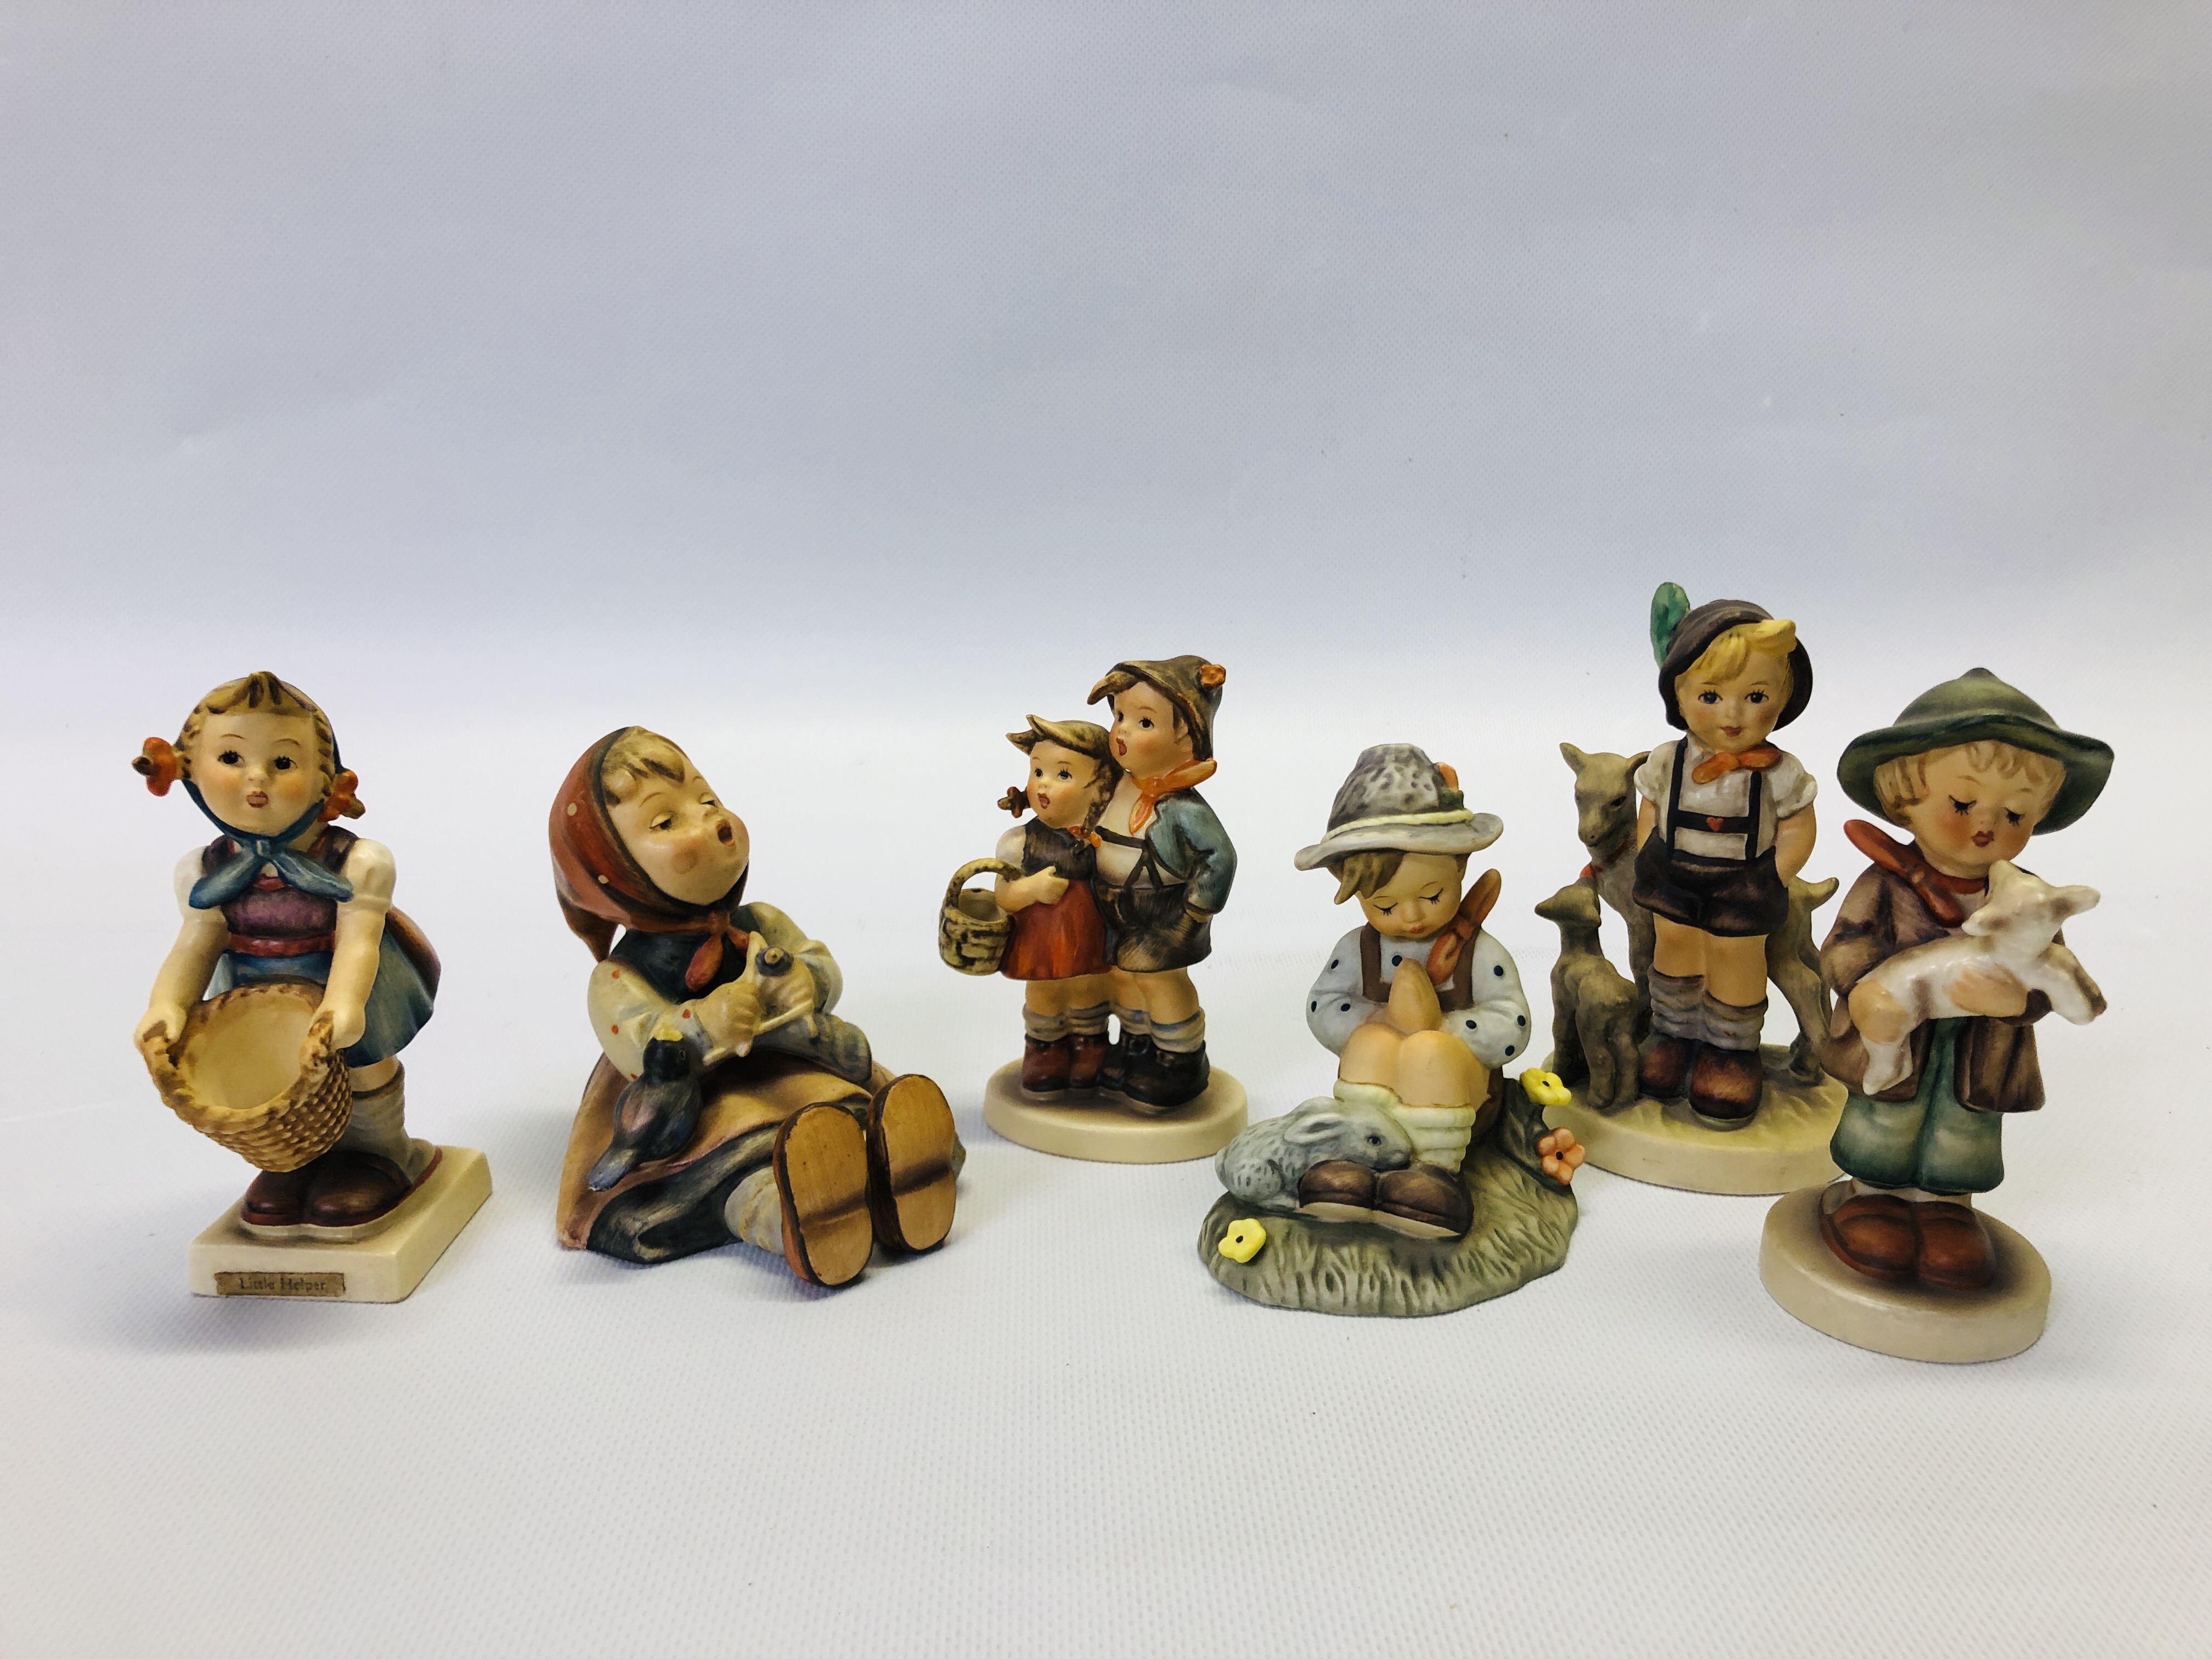 A GROUP OF 6 ASSORTED "GOEBEL" CABINET ORNAMENTS T O INCLUDE "LITTLE HELPER" NATURES PRAYER BH55